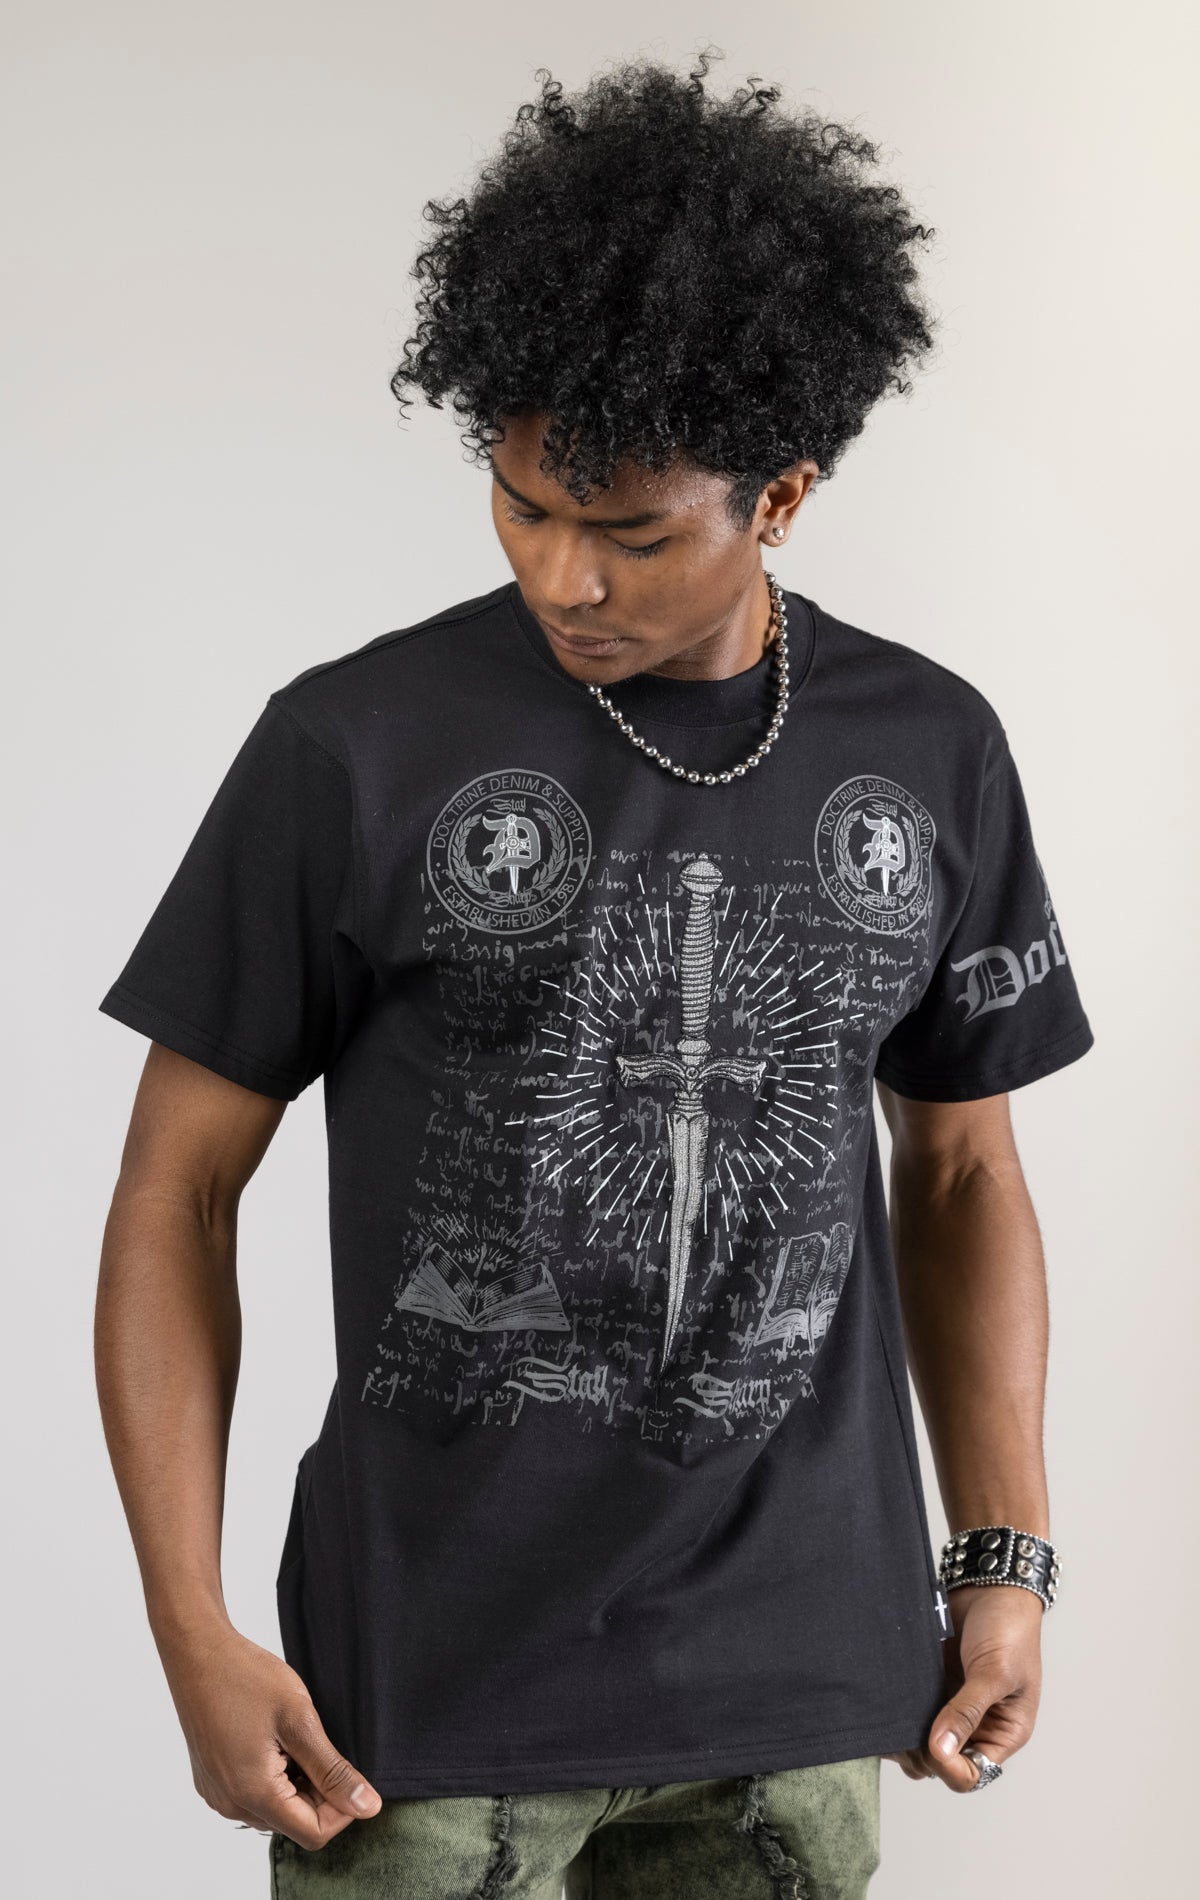 black CORE DAGGER vintage graphic t-shirt. The shirt is made from 100% cotton with a vintage wash and features a high-definition digital graphic on the front.